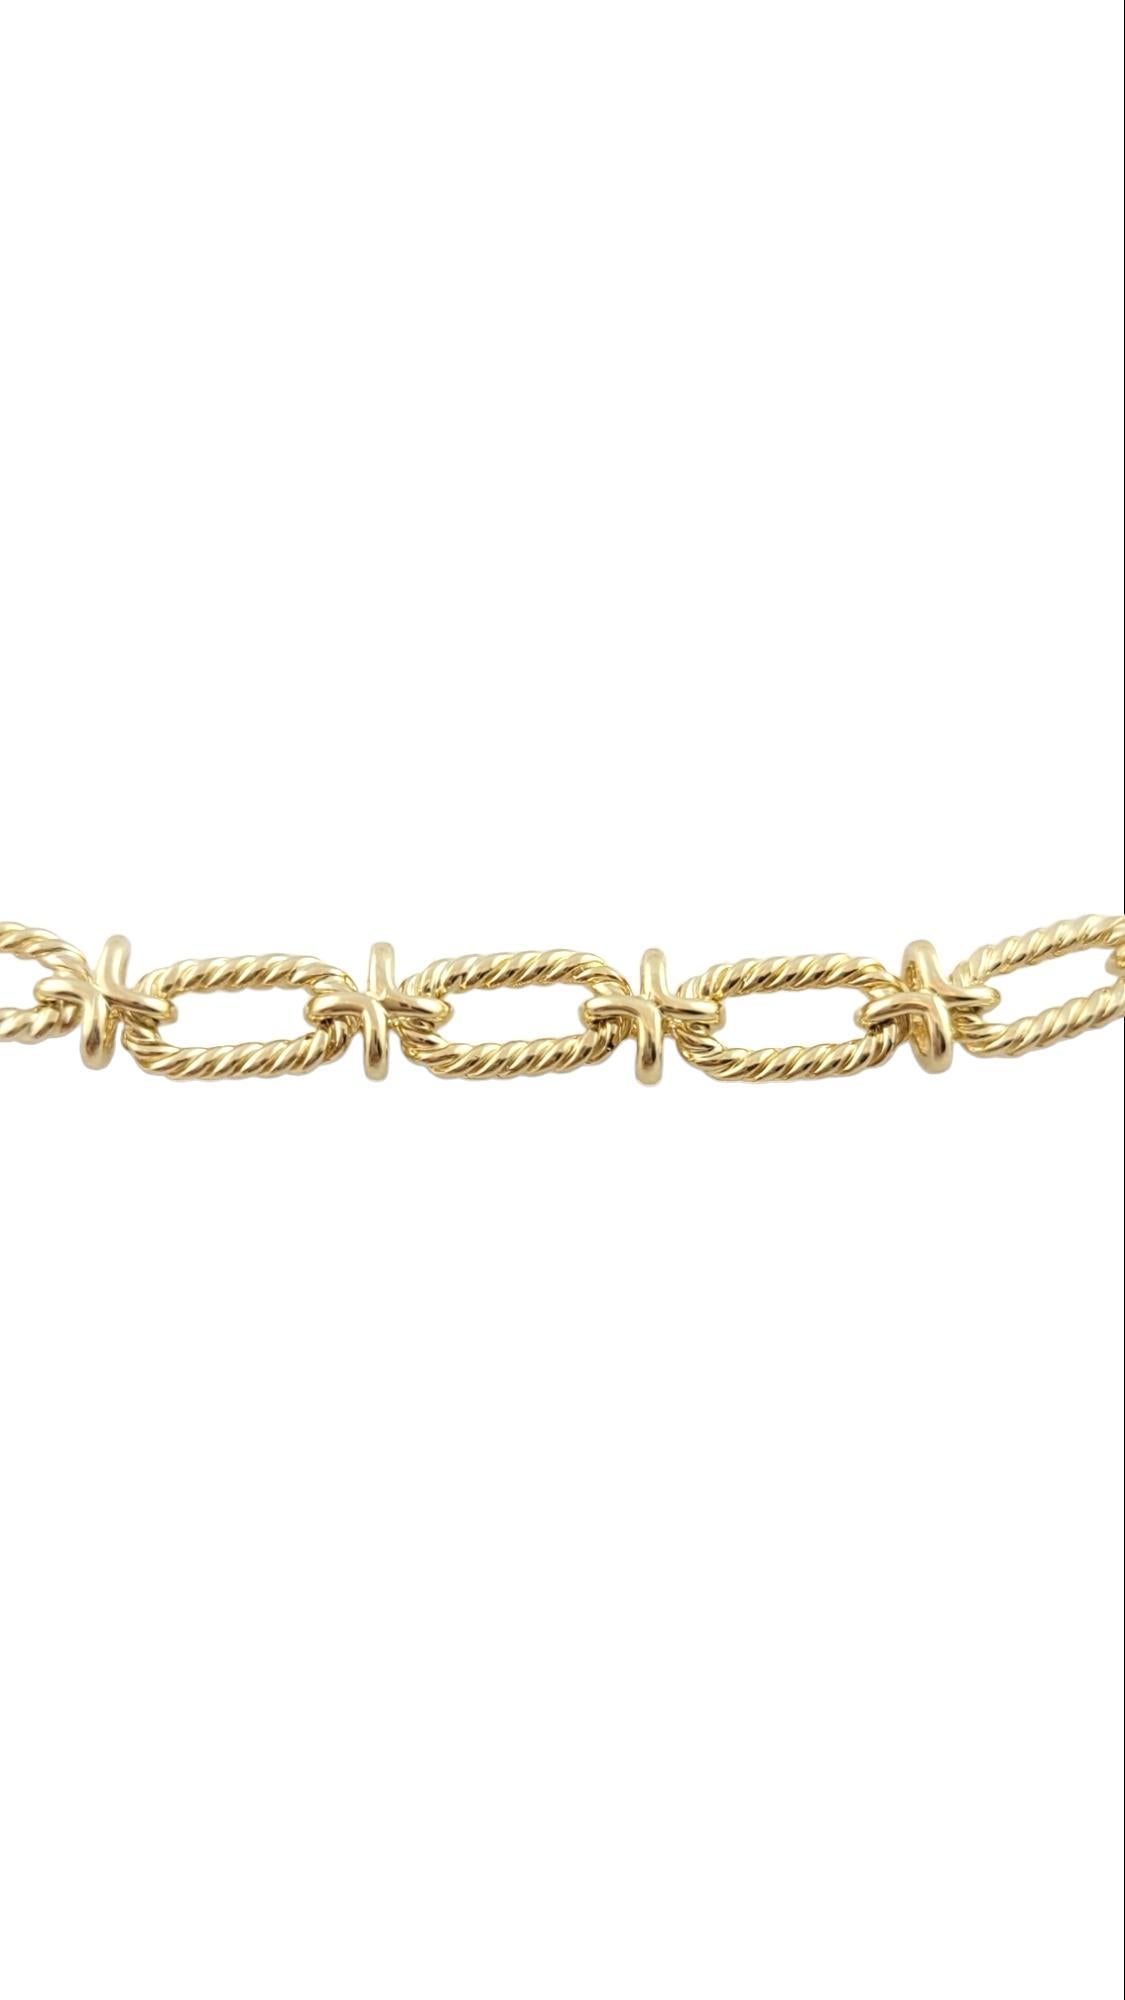 Vintage Tiffany & Co. 14K Yellow Gold Oval Link Ribbed Chain

This gorgeous 14K gold Tiffany & Co chain has a beautiful oval link pattern and ribbed texture!

Chain length: 24